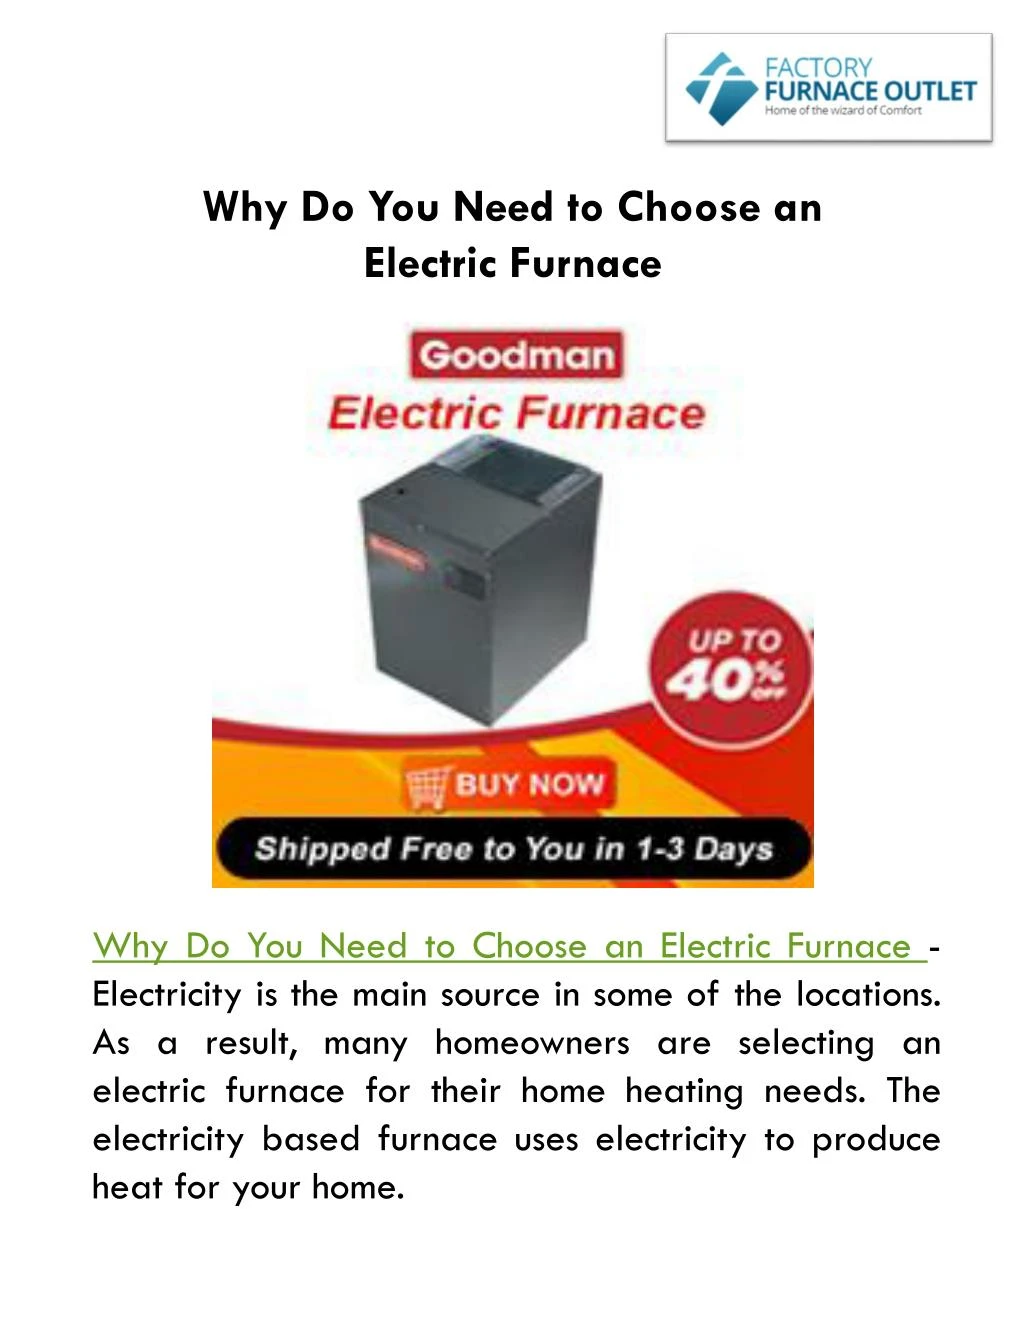 why do you need to choose an electric furnace